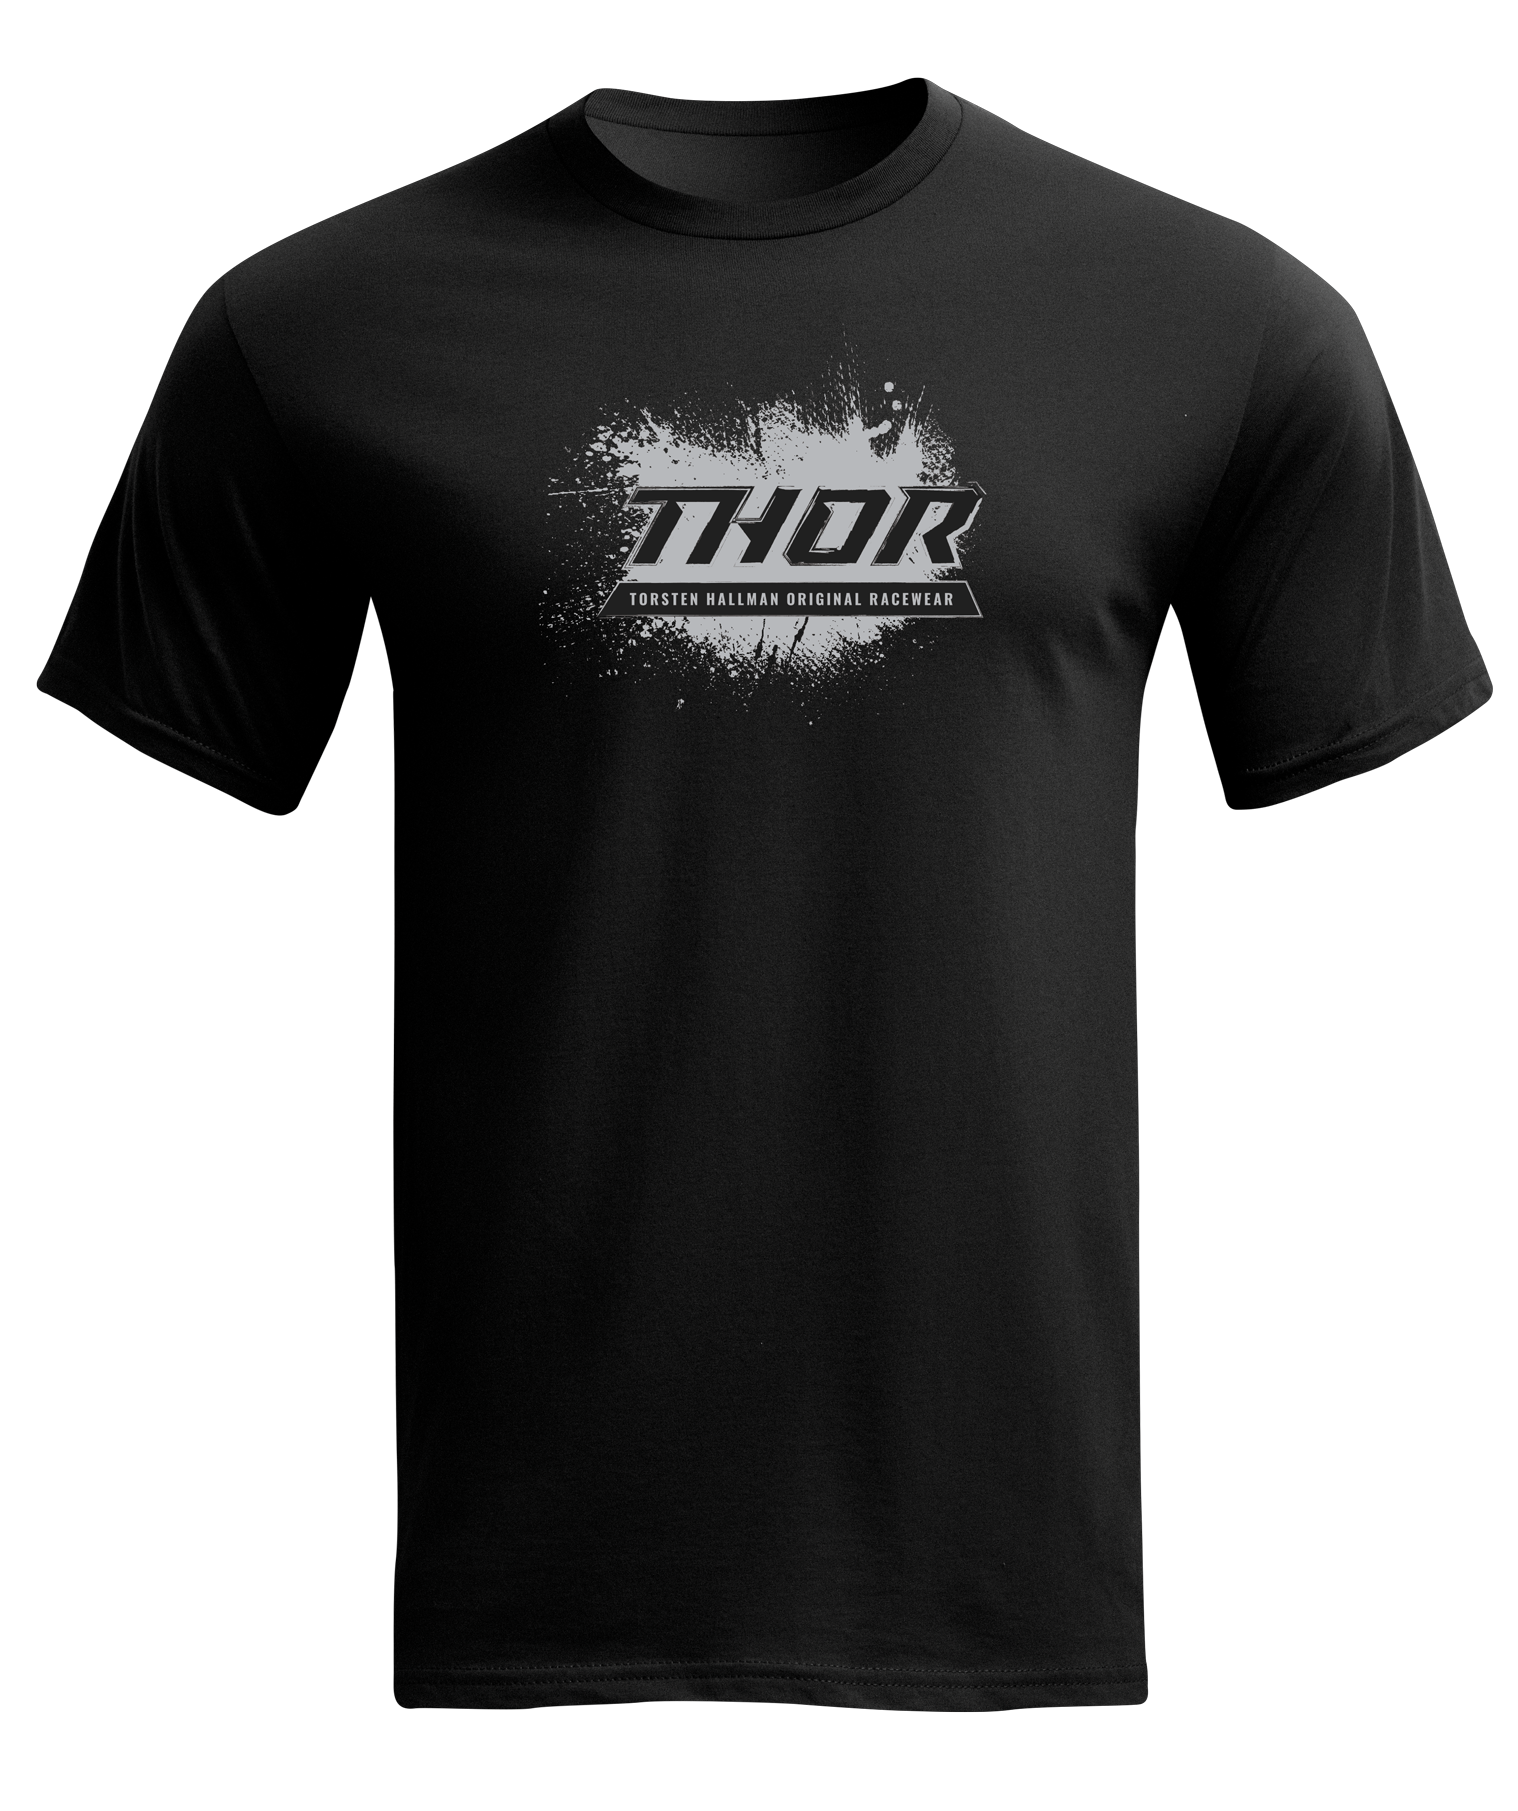 Thor MX - Products